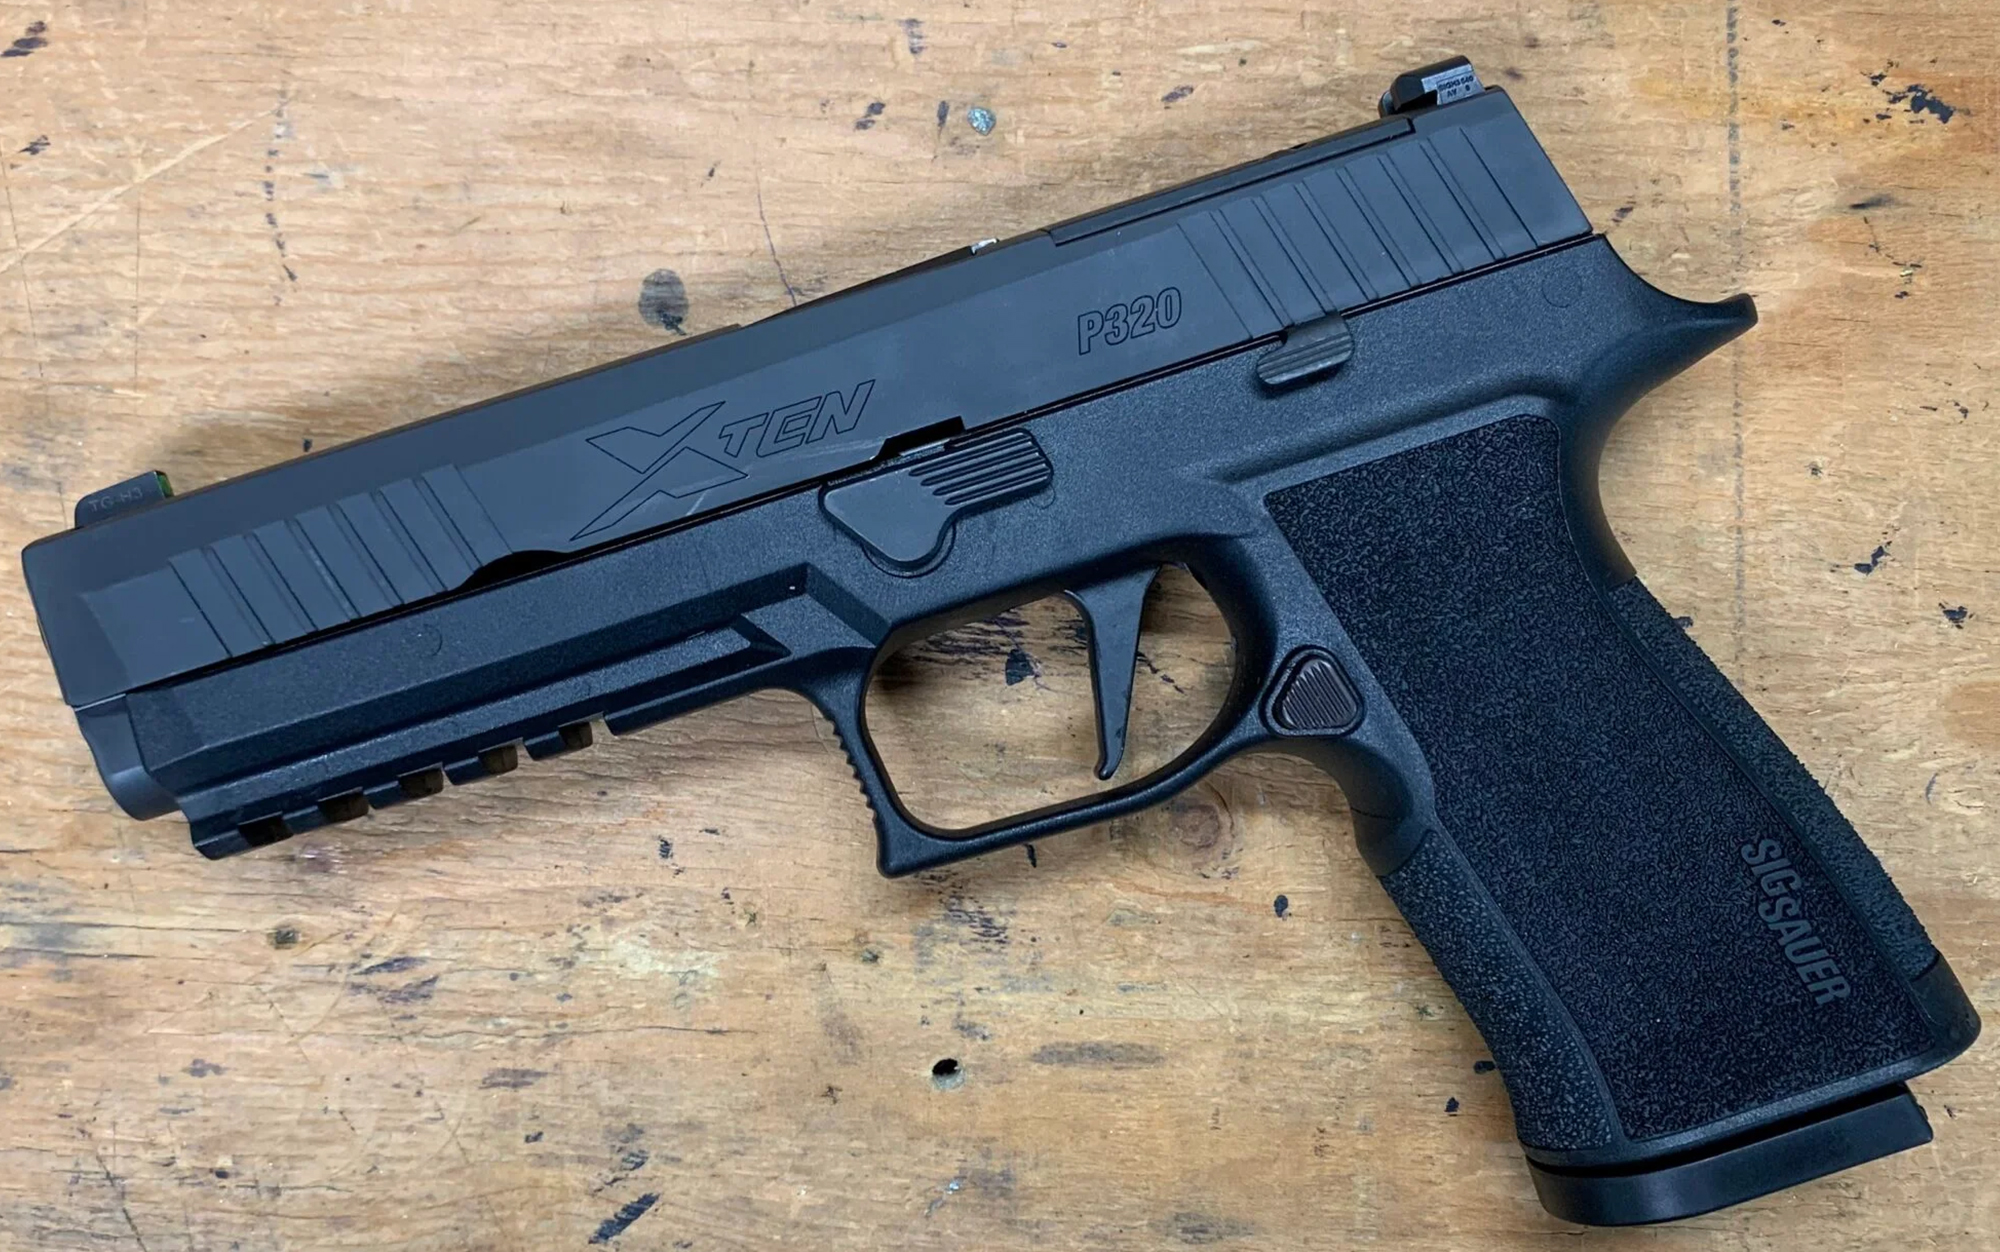 We tested the Sig P320 XTen.